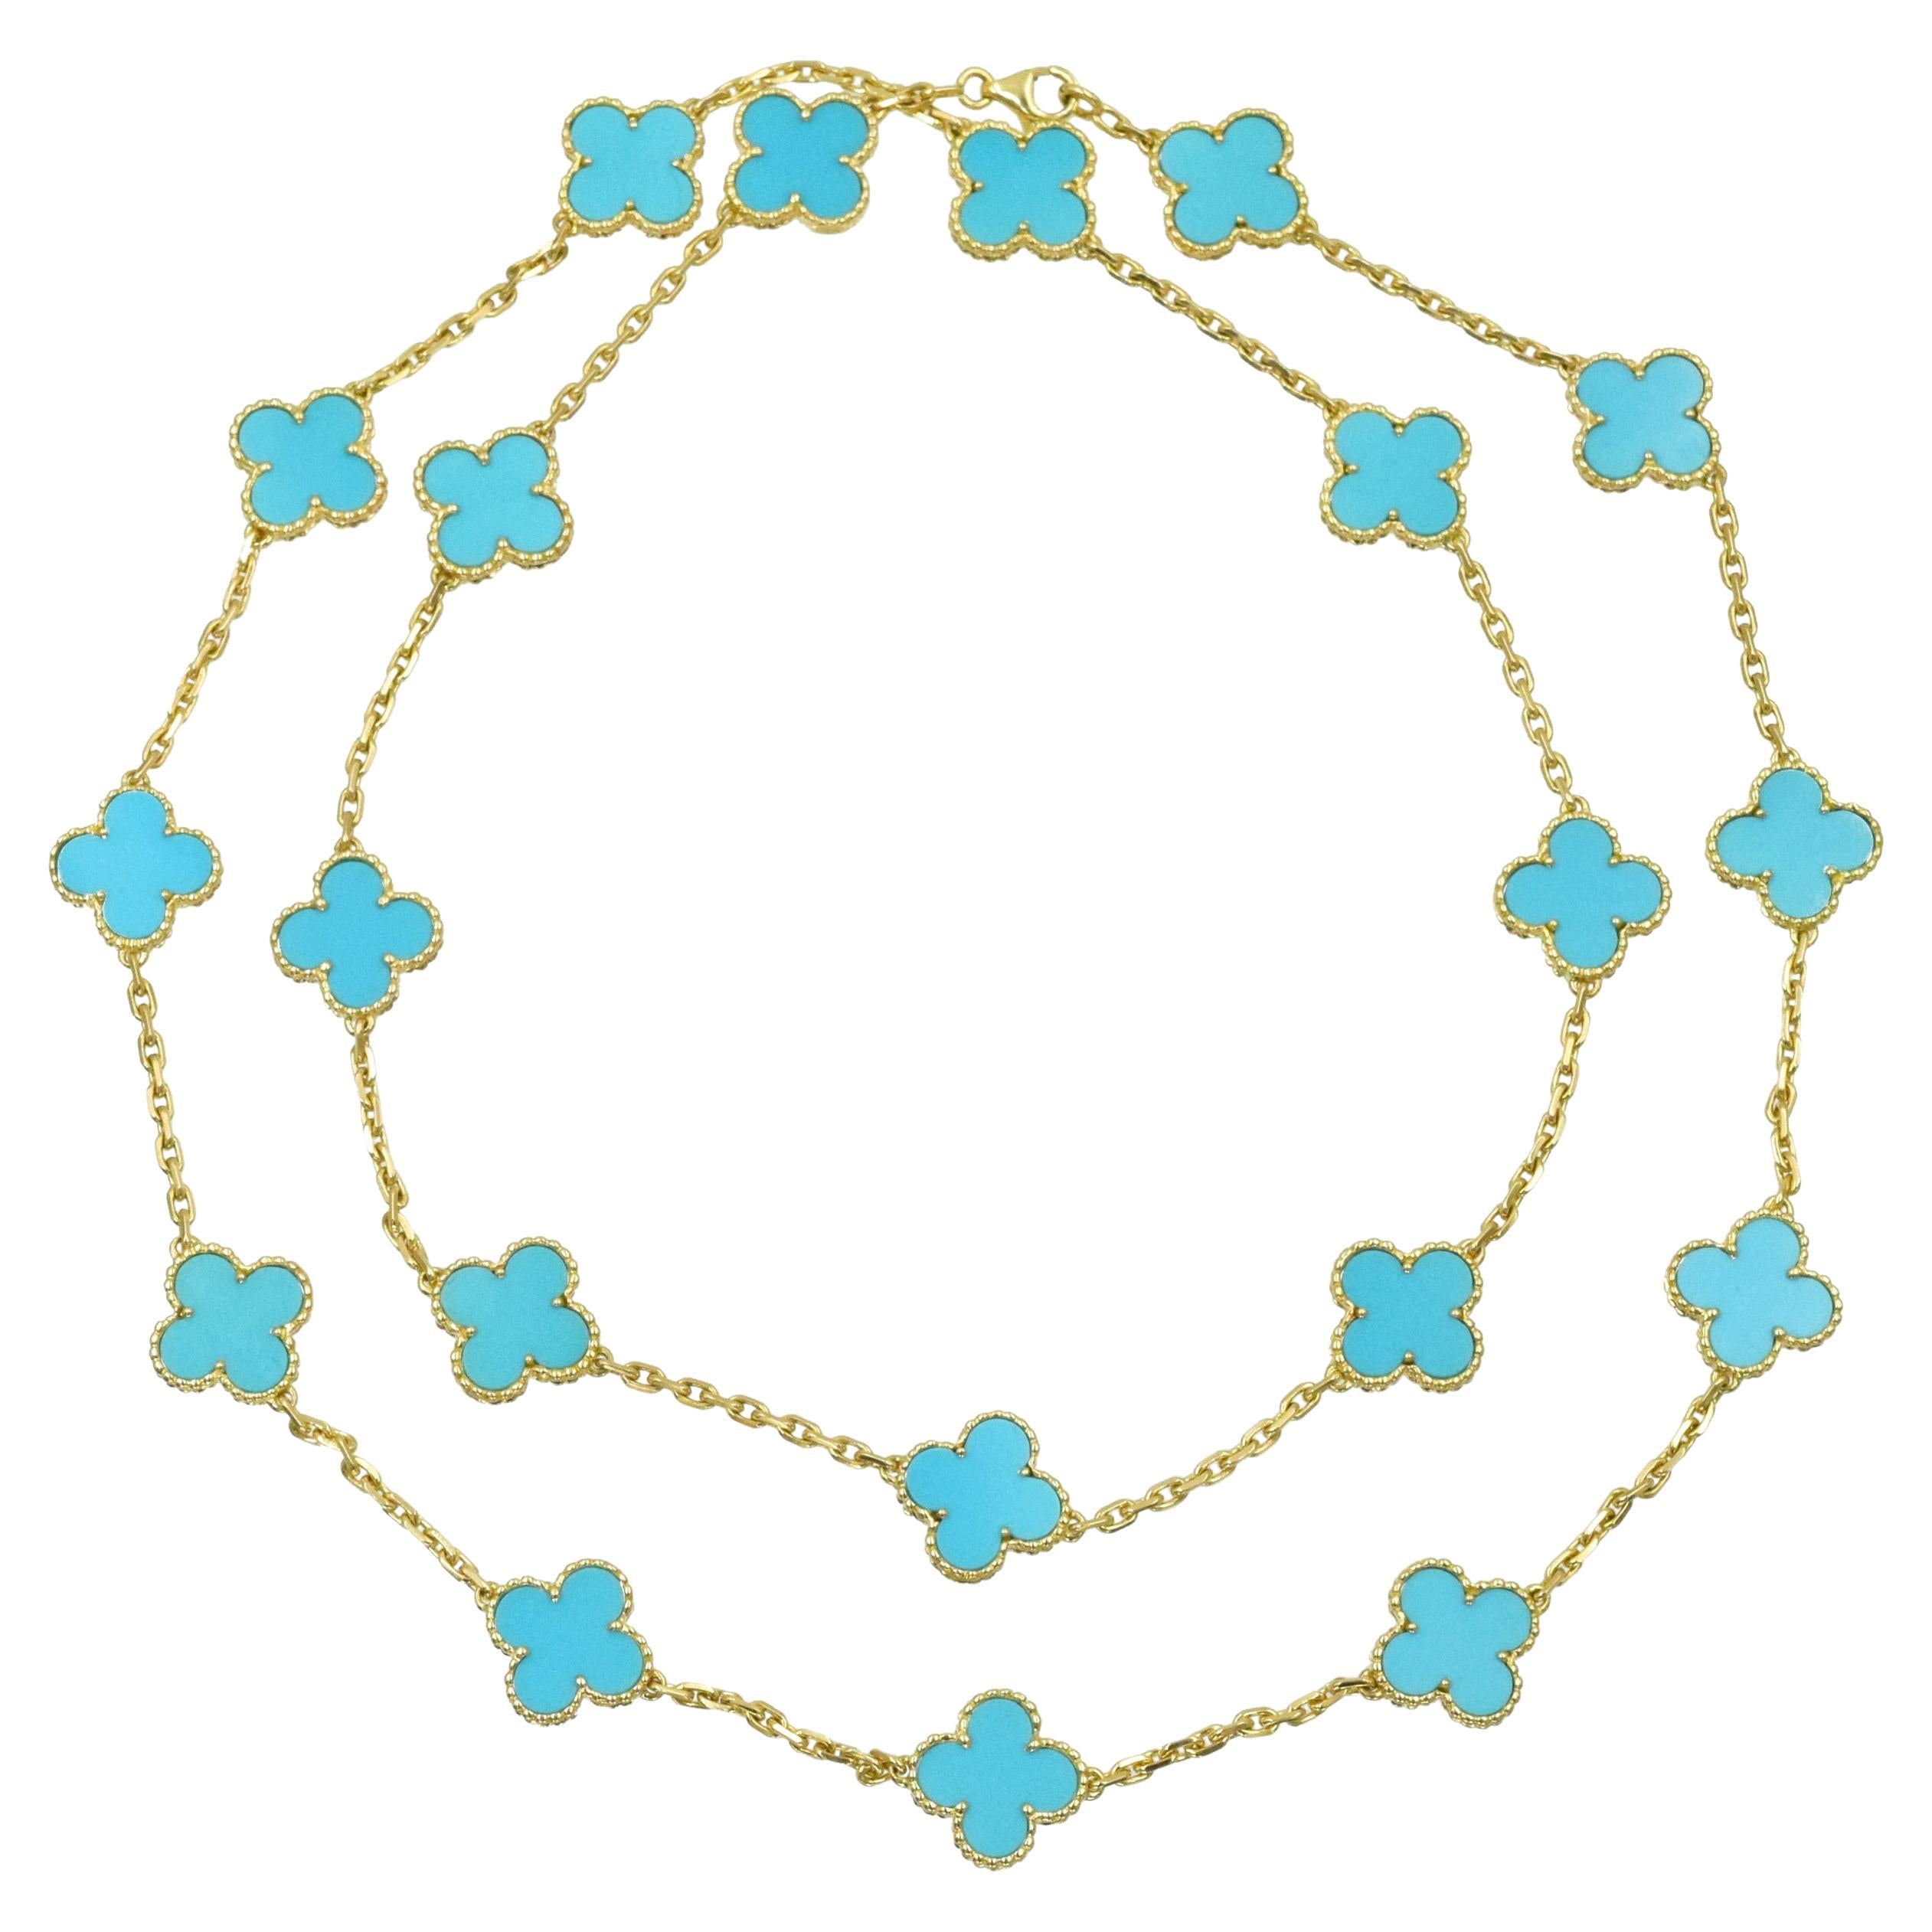 Van Cleeef & Arpels 'Vintage Alhamrba' Turquoise Necklace. This necklace has
twenty motifs, turquoise plaques, all set in 18k yellow gold with chain, signed VCA, numbered,
Length:  33 3/8 in 
Made in France